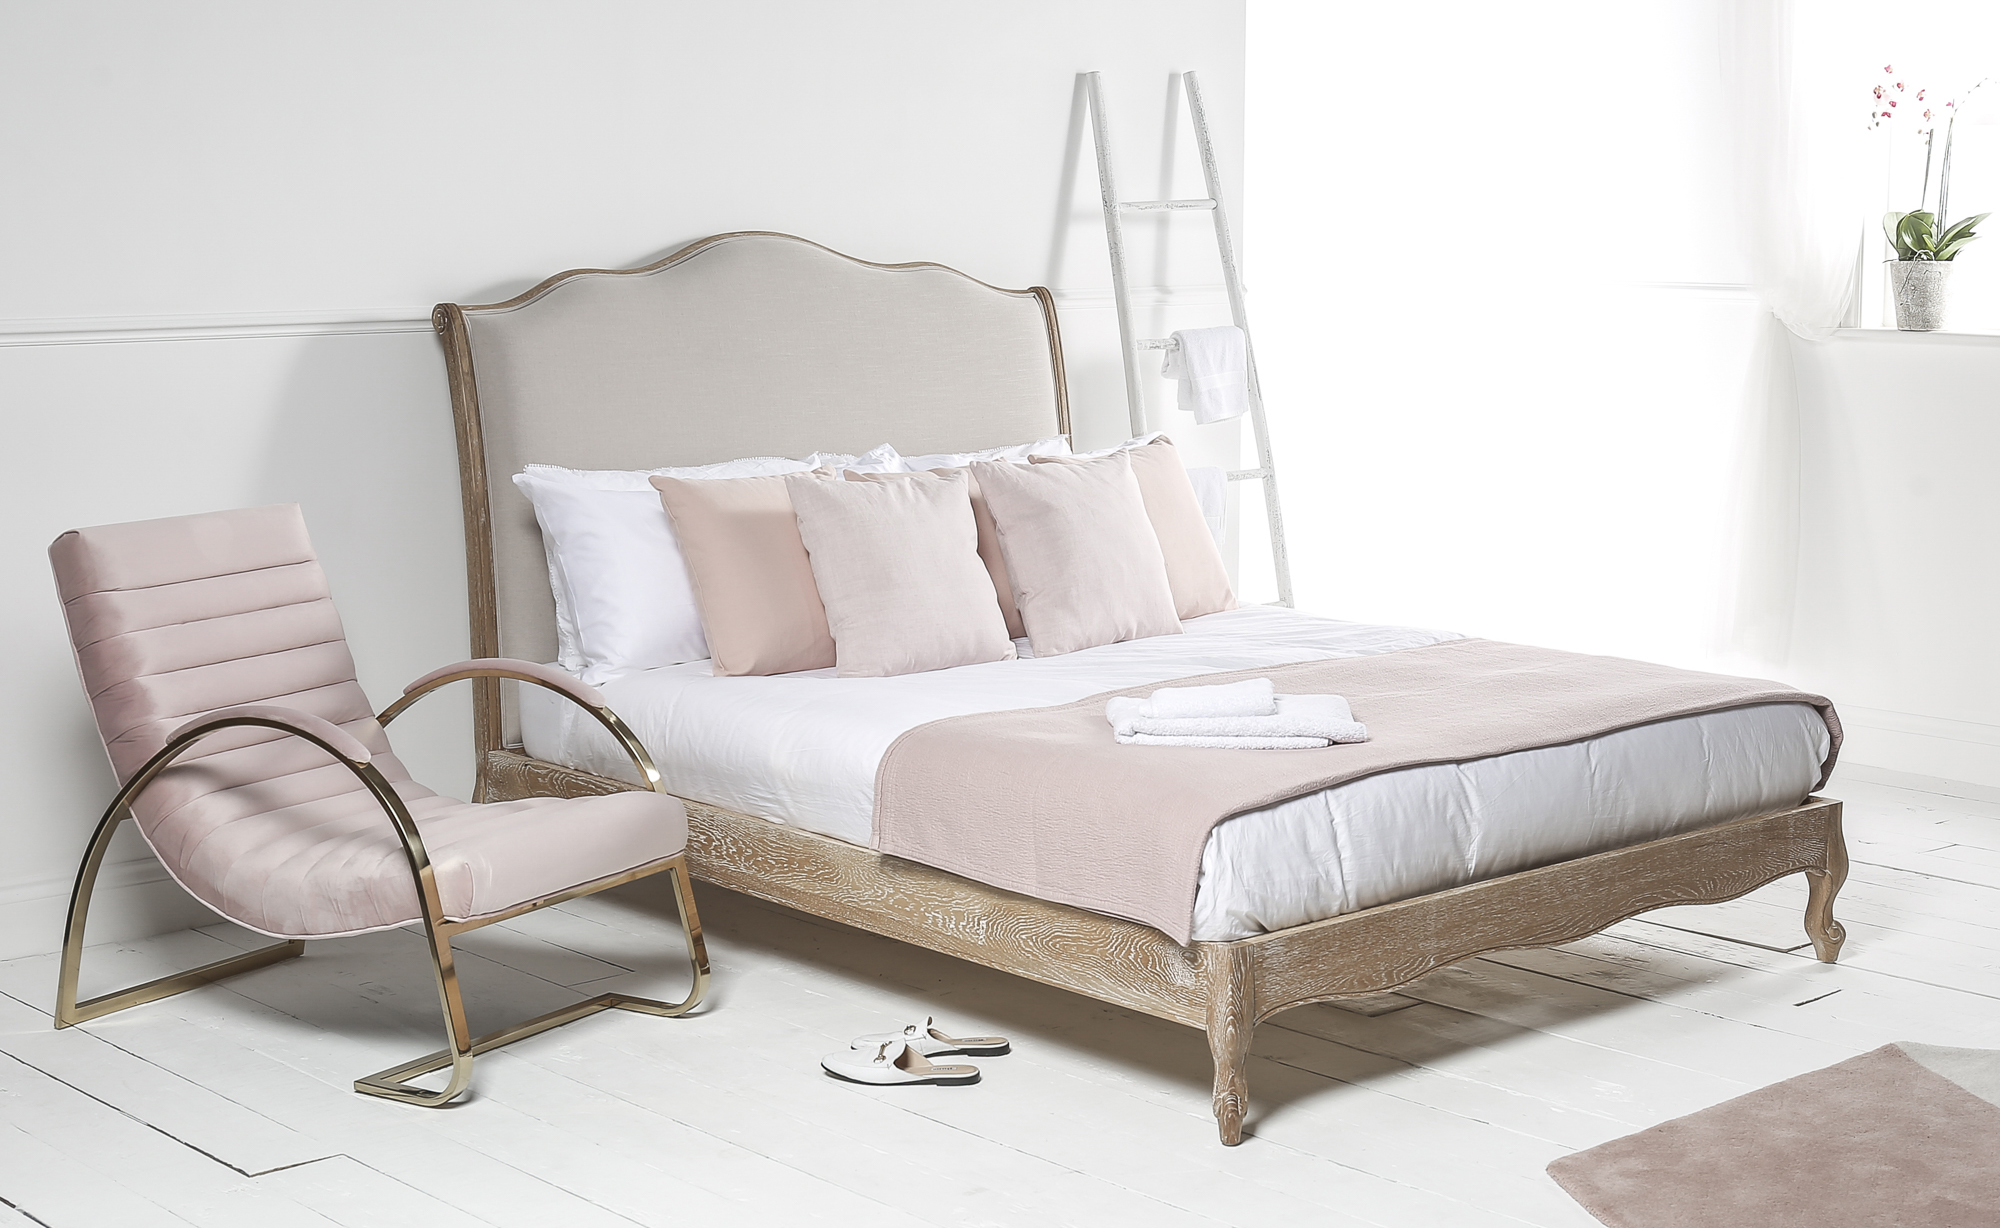 4 Comfy Grosvenor Beds You Need In Your Life